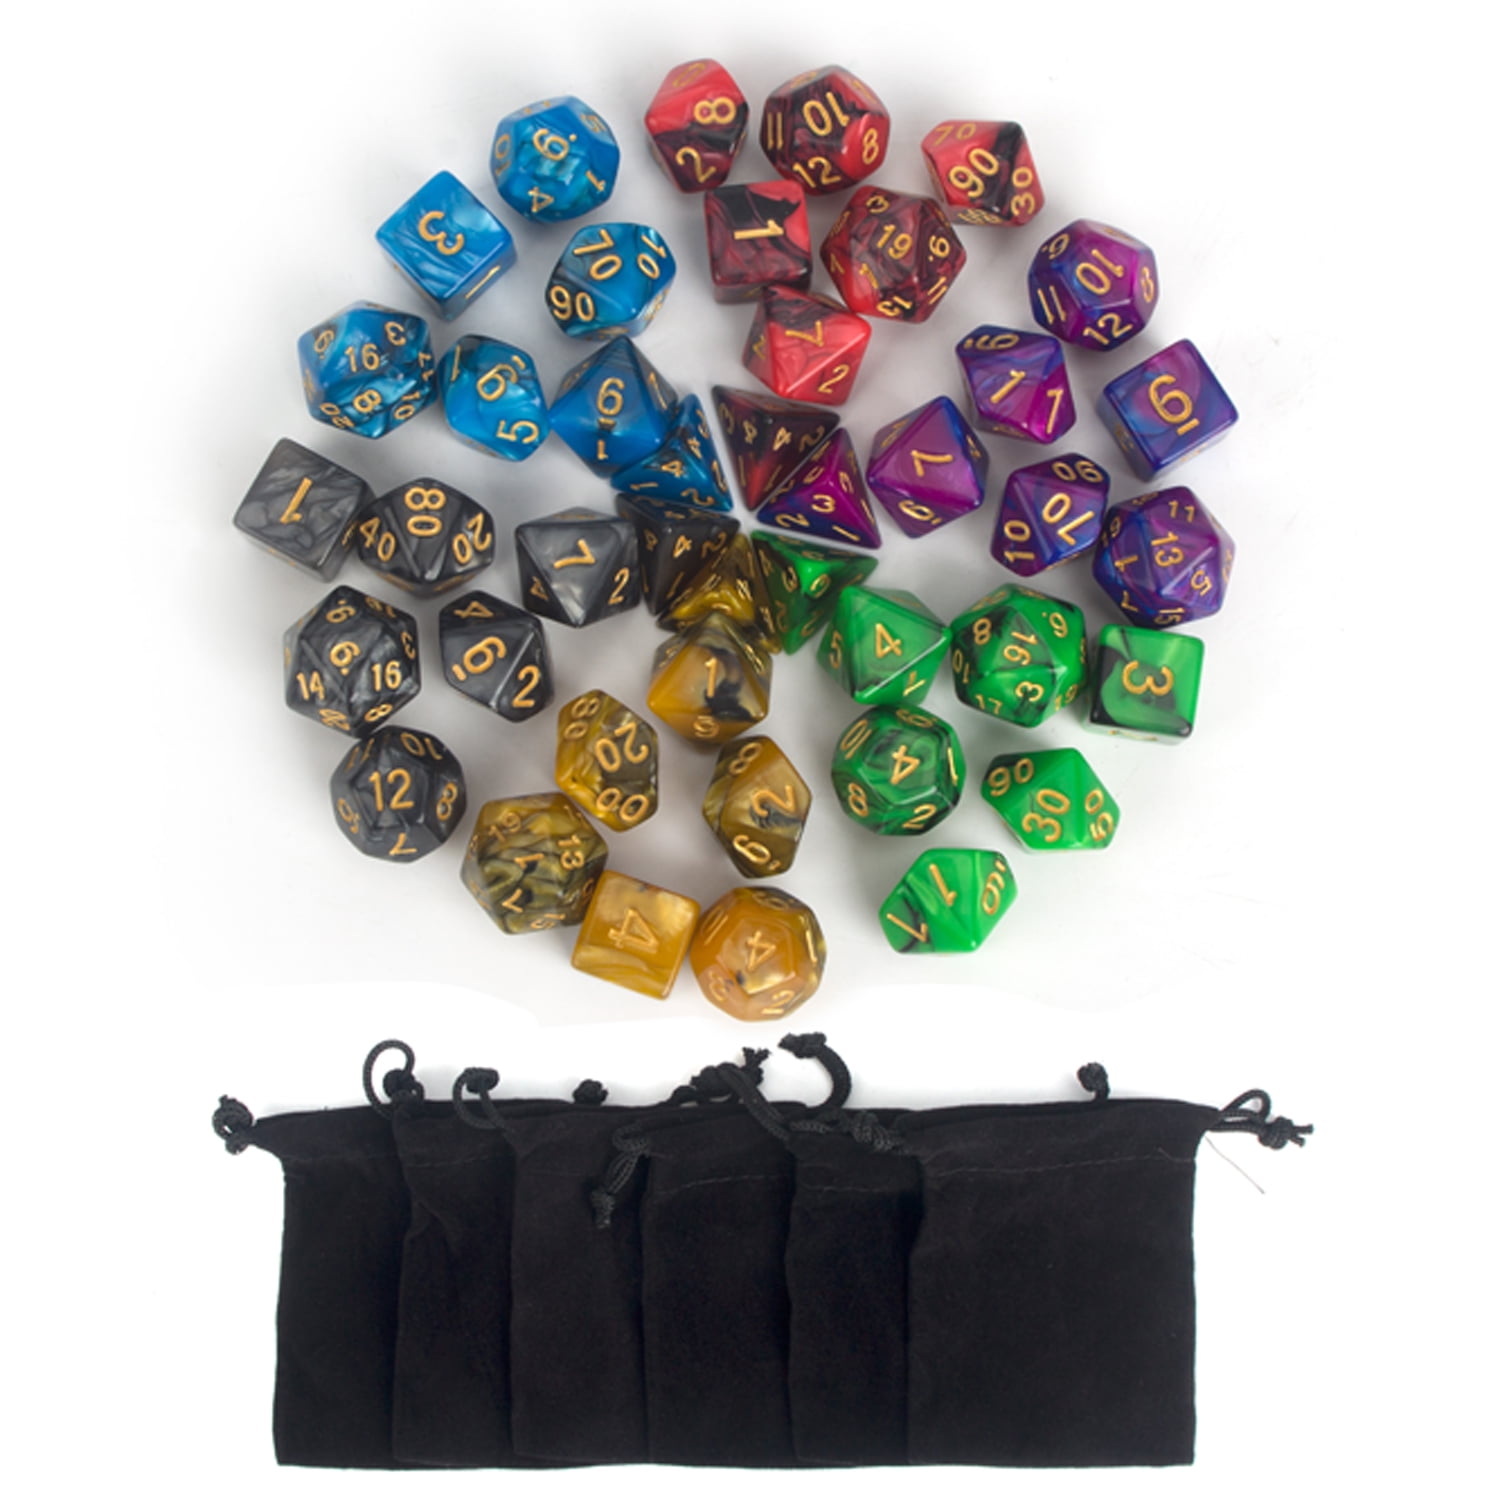 Cerixo 2 x 7 Dice Set Two Colors Polyhedral Dice Series with Black Drawstring Bag Dungeons and Dragons DND RPG MTG Table Games Dice